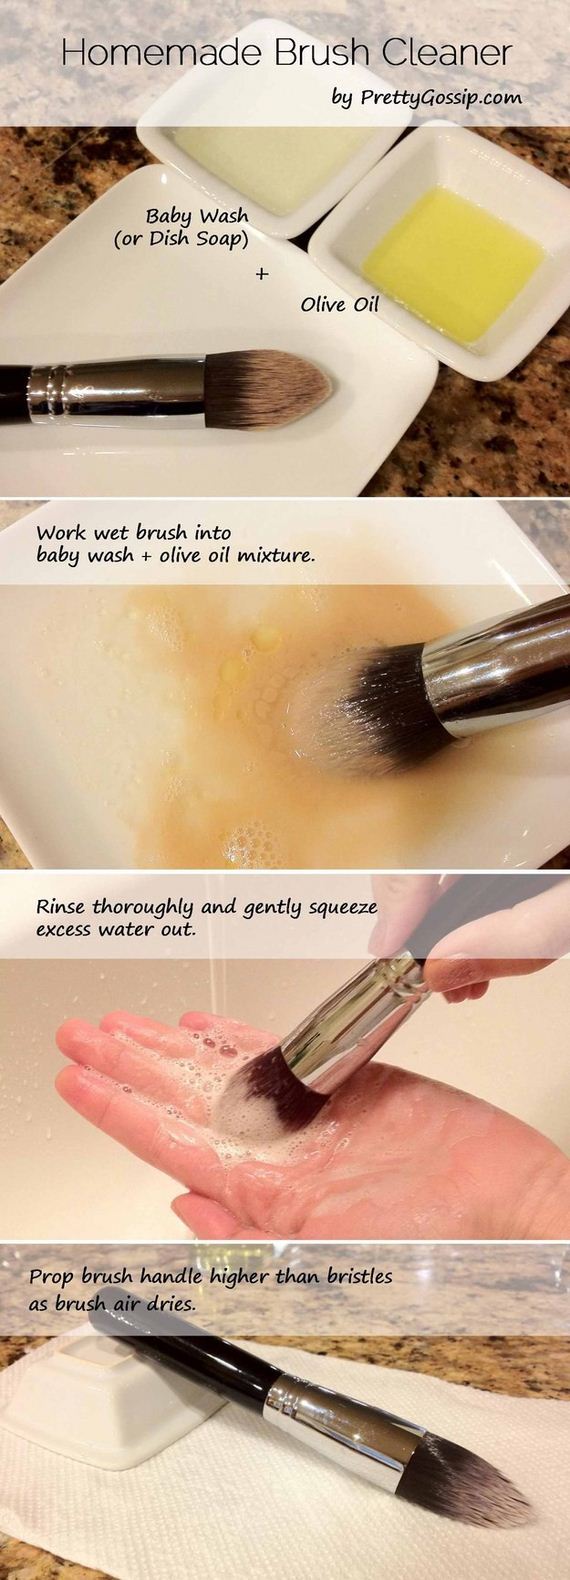 cleaning-makeup